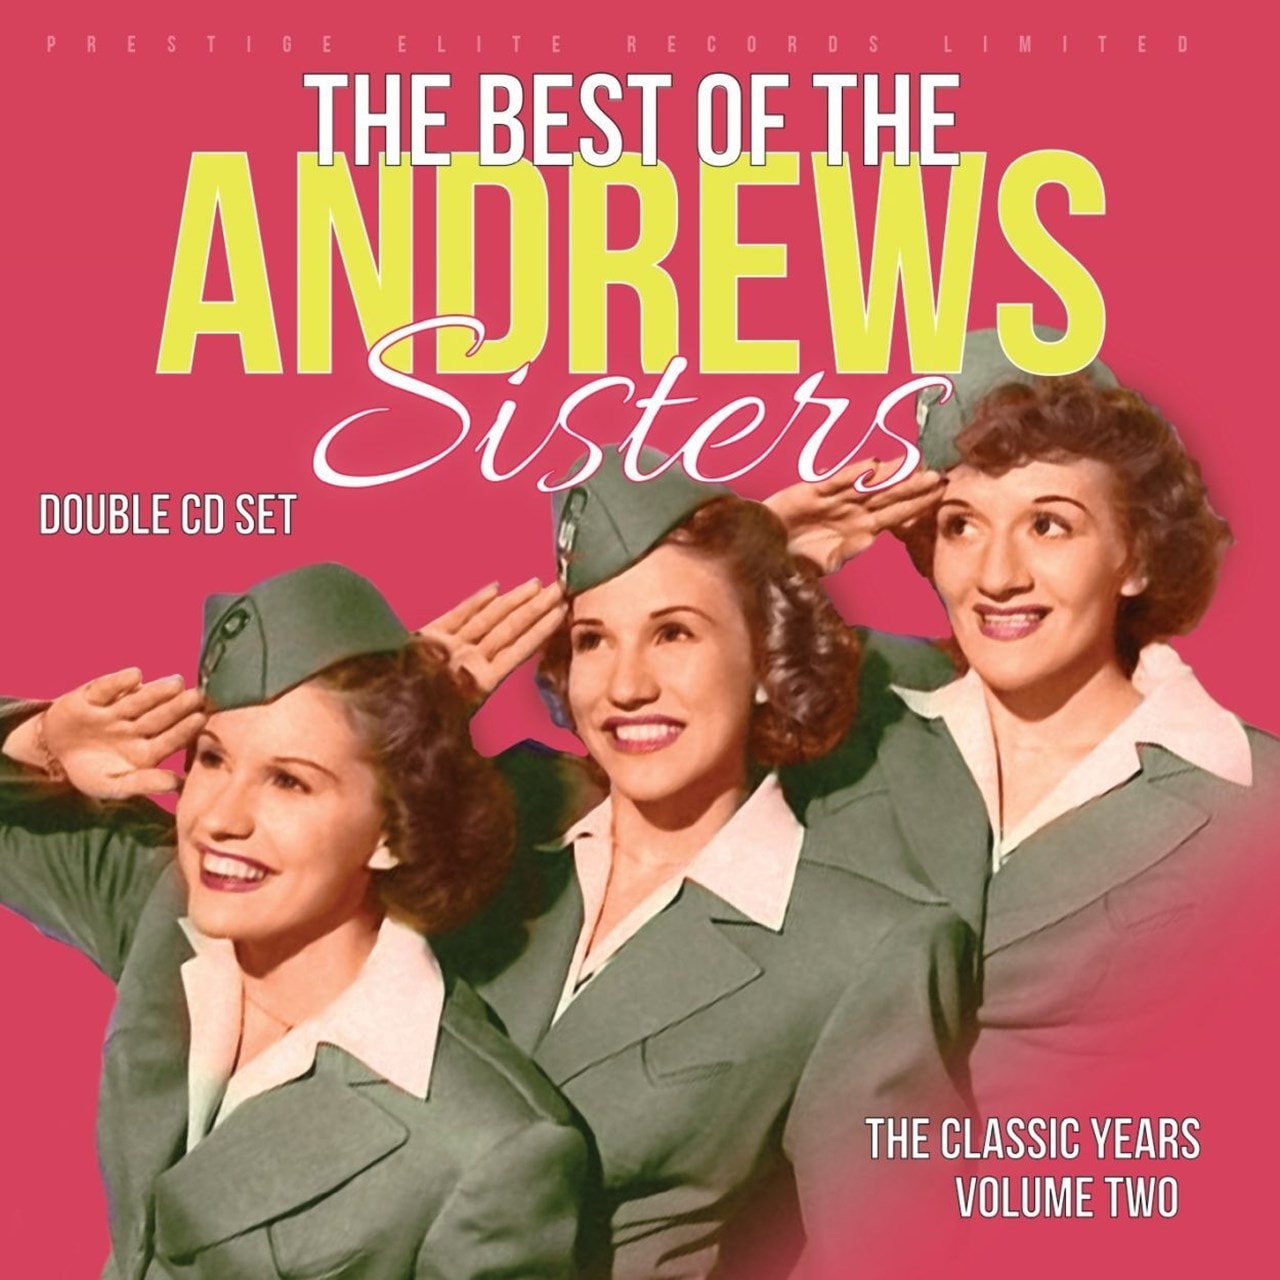 The Classic Years The Best Of The Andrews Sisters Volume 2 Cd Album Free Shipping Over £ 2355